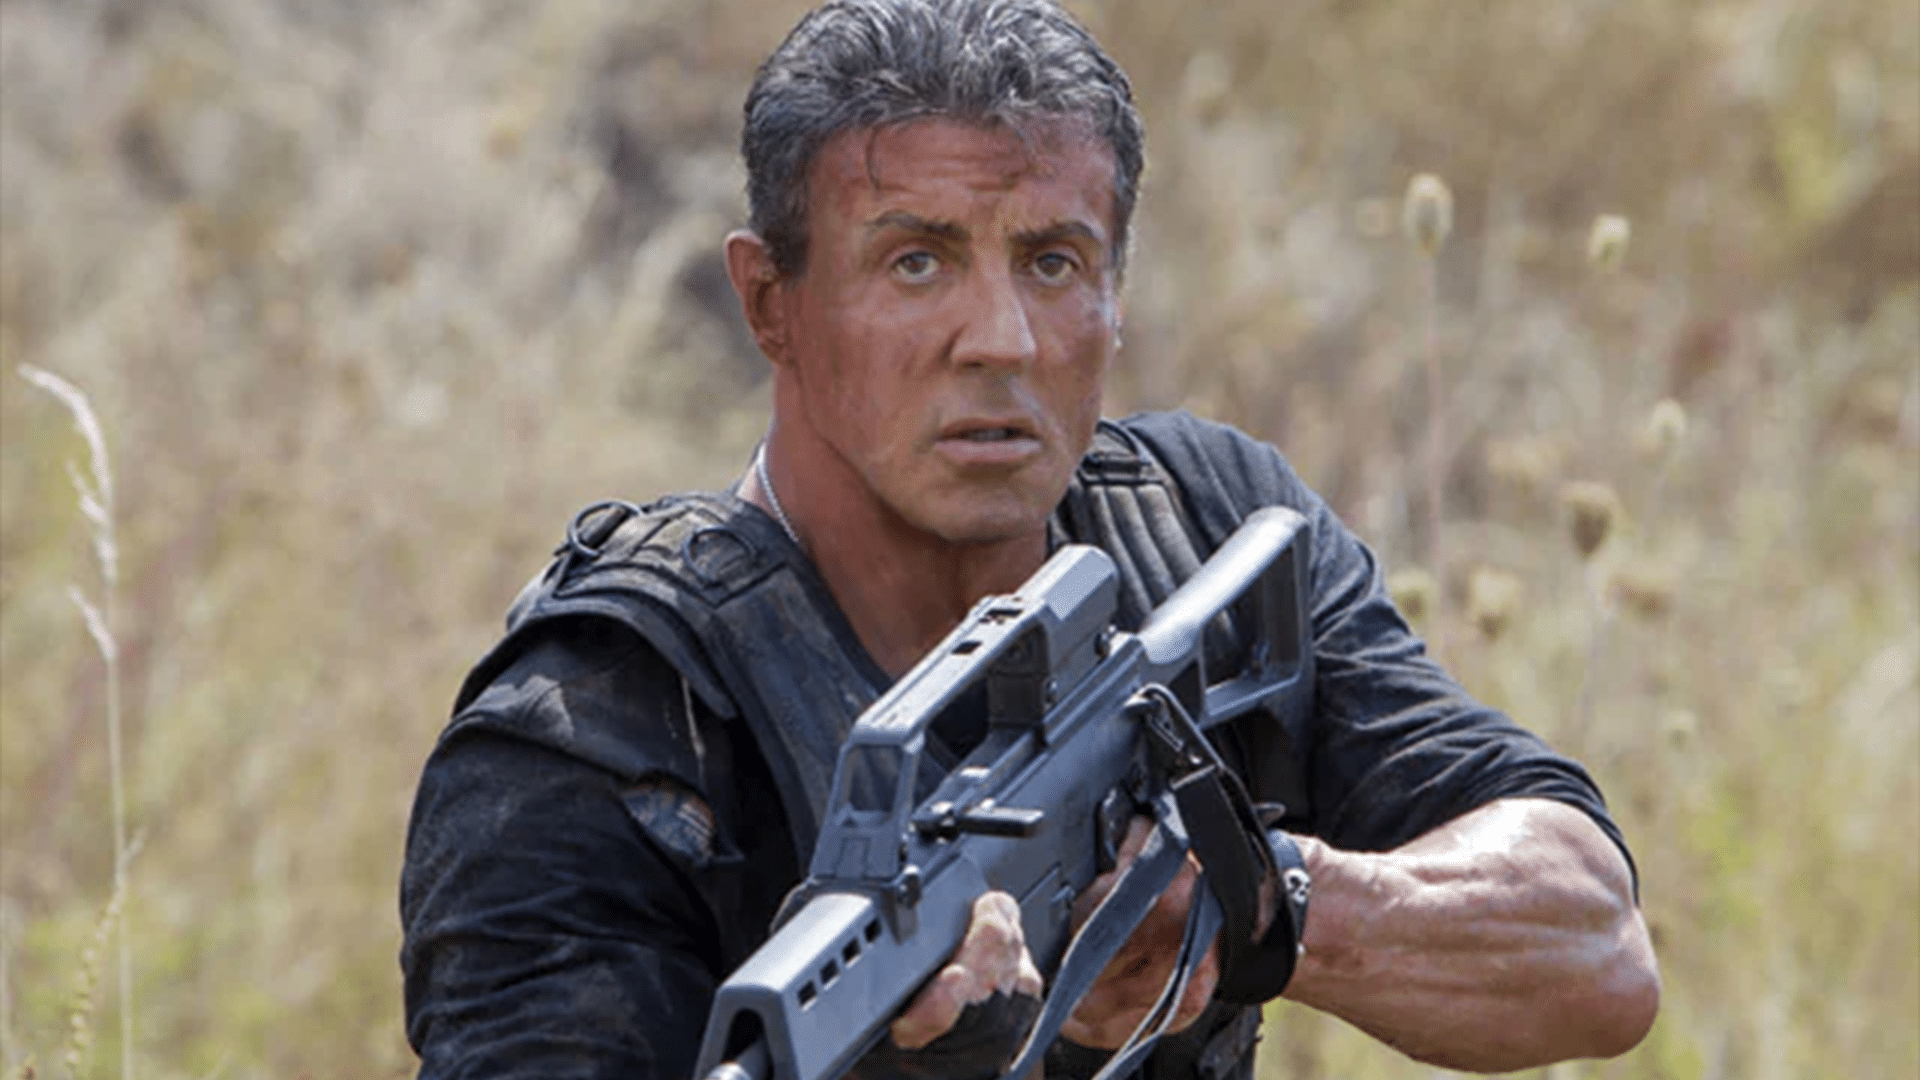 Sylvester Stallone in Expendables 4